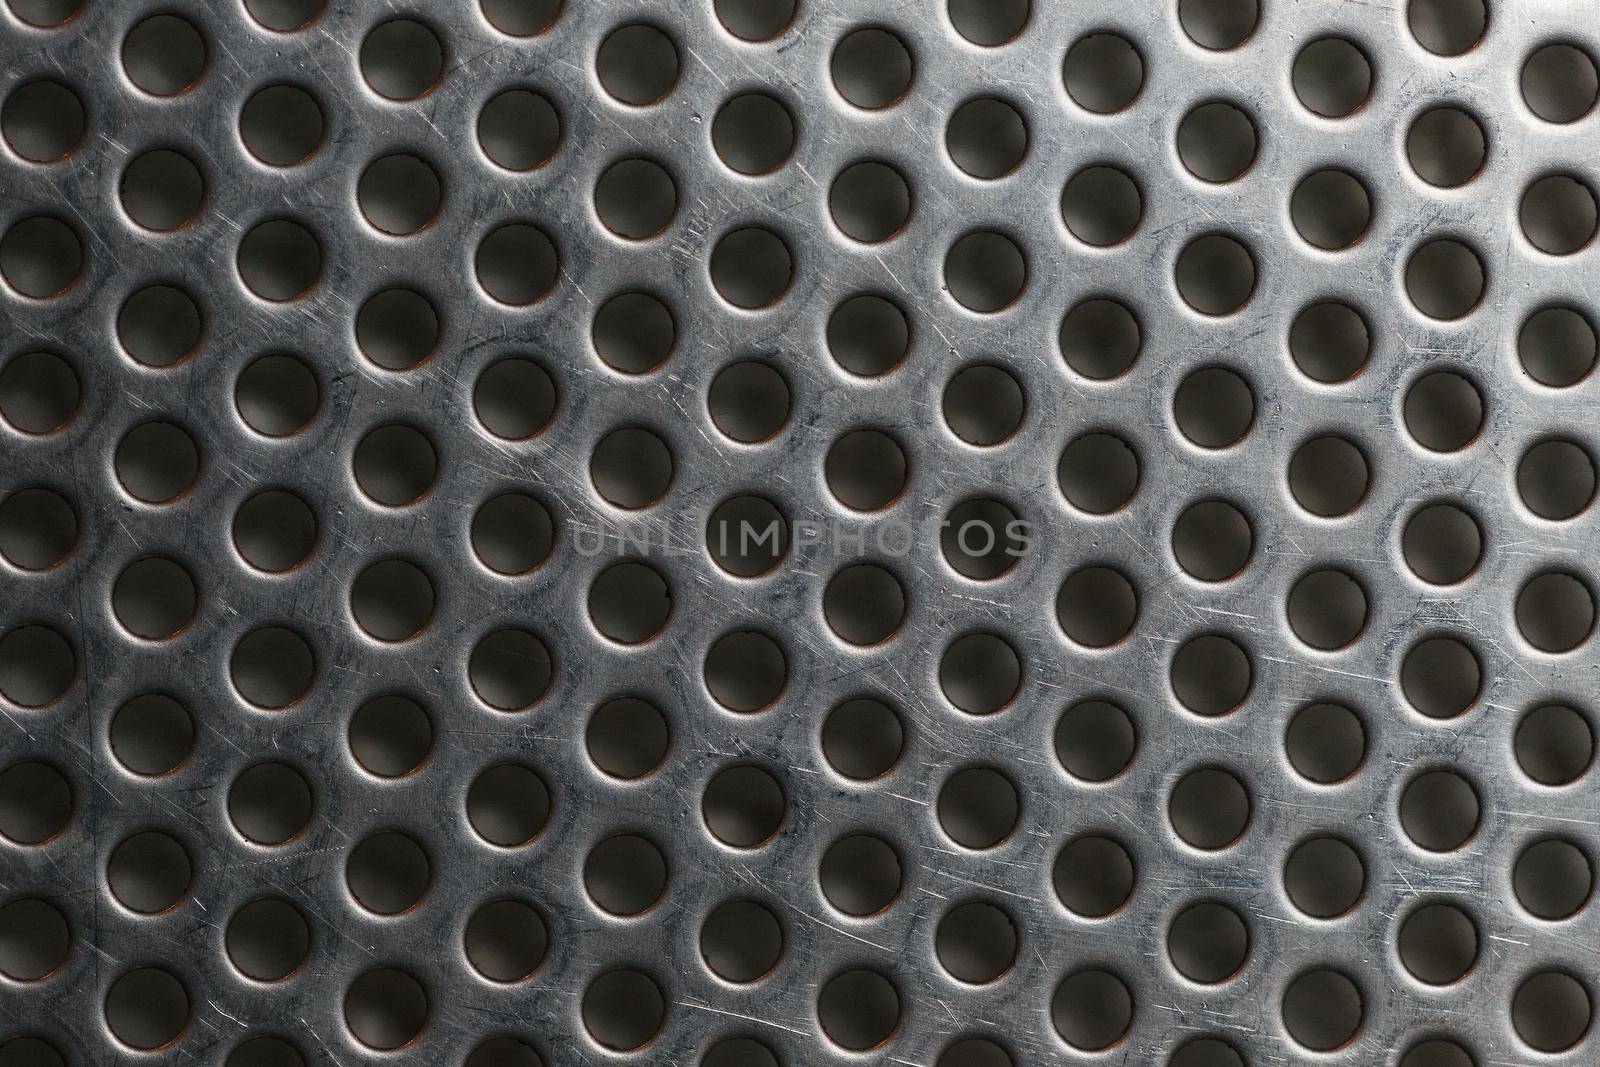 Silver metal shaped like a honeycomb for design background, texture